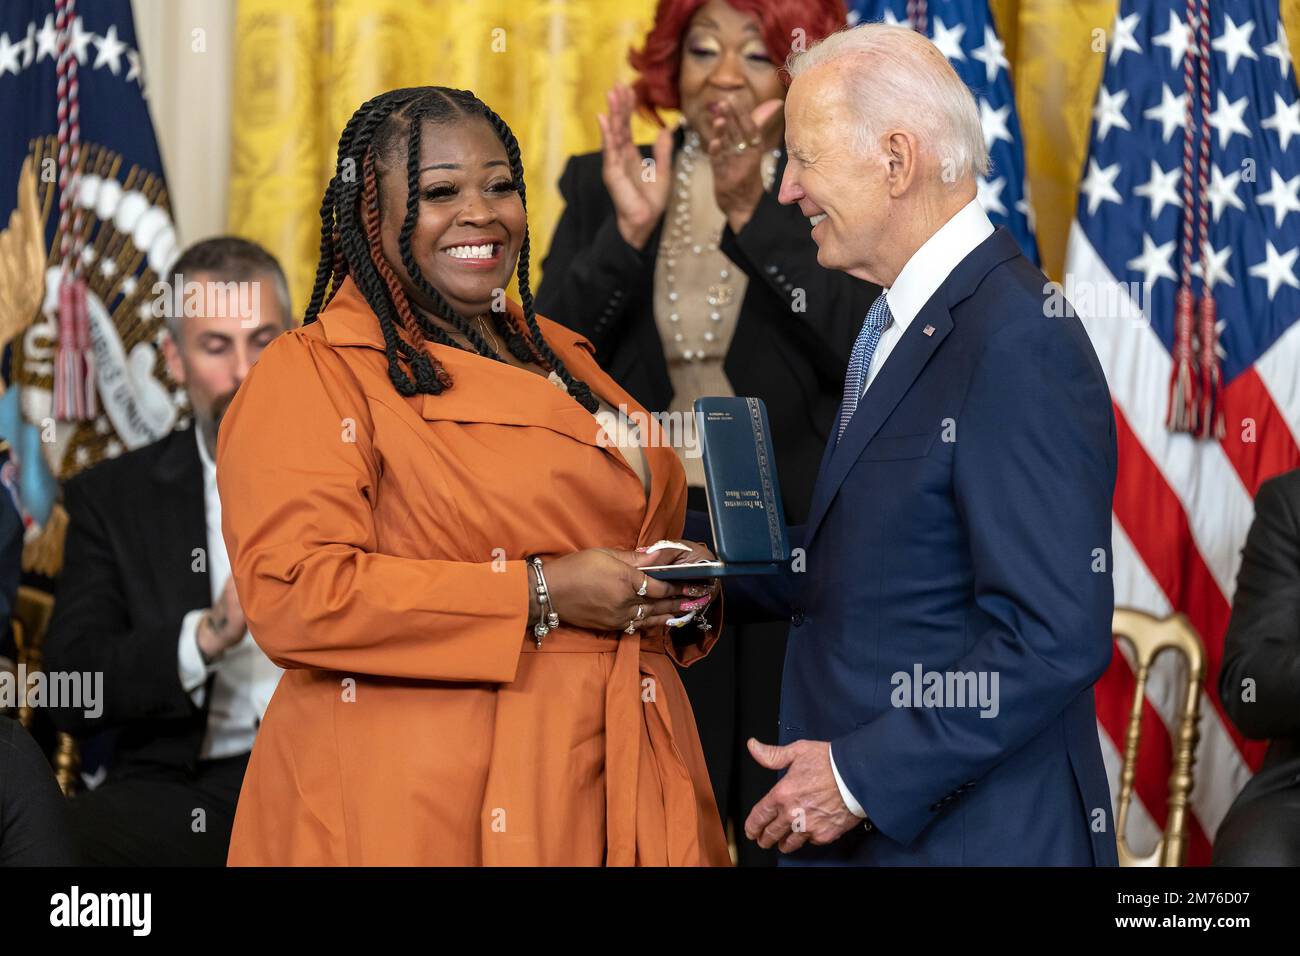 Washington, United States Of America. 06th Jan, 2023. Washington, United States of America. 06 January, 2023. U.S President Joe Biden awards the Presidential Citizens Medal to Fulton County election worker Shaye Moss, left, for her role in securing the integrity of the 2020 elections during a ceremony at the East Room of the White House, January 6, 2023 in Washington, DC The ceremony marked the two-year anniversary of the January 6th insurrection. Credit: Adam Schultz/White House Photo/Alamy Live News Stock Photo